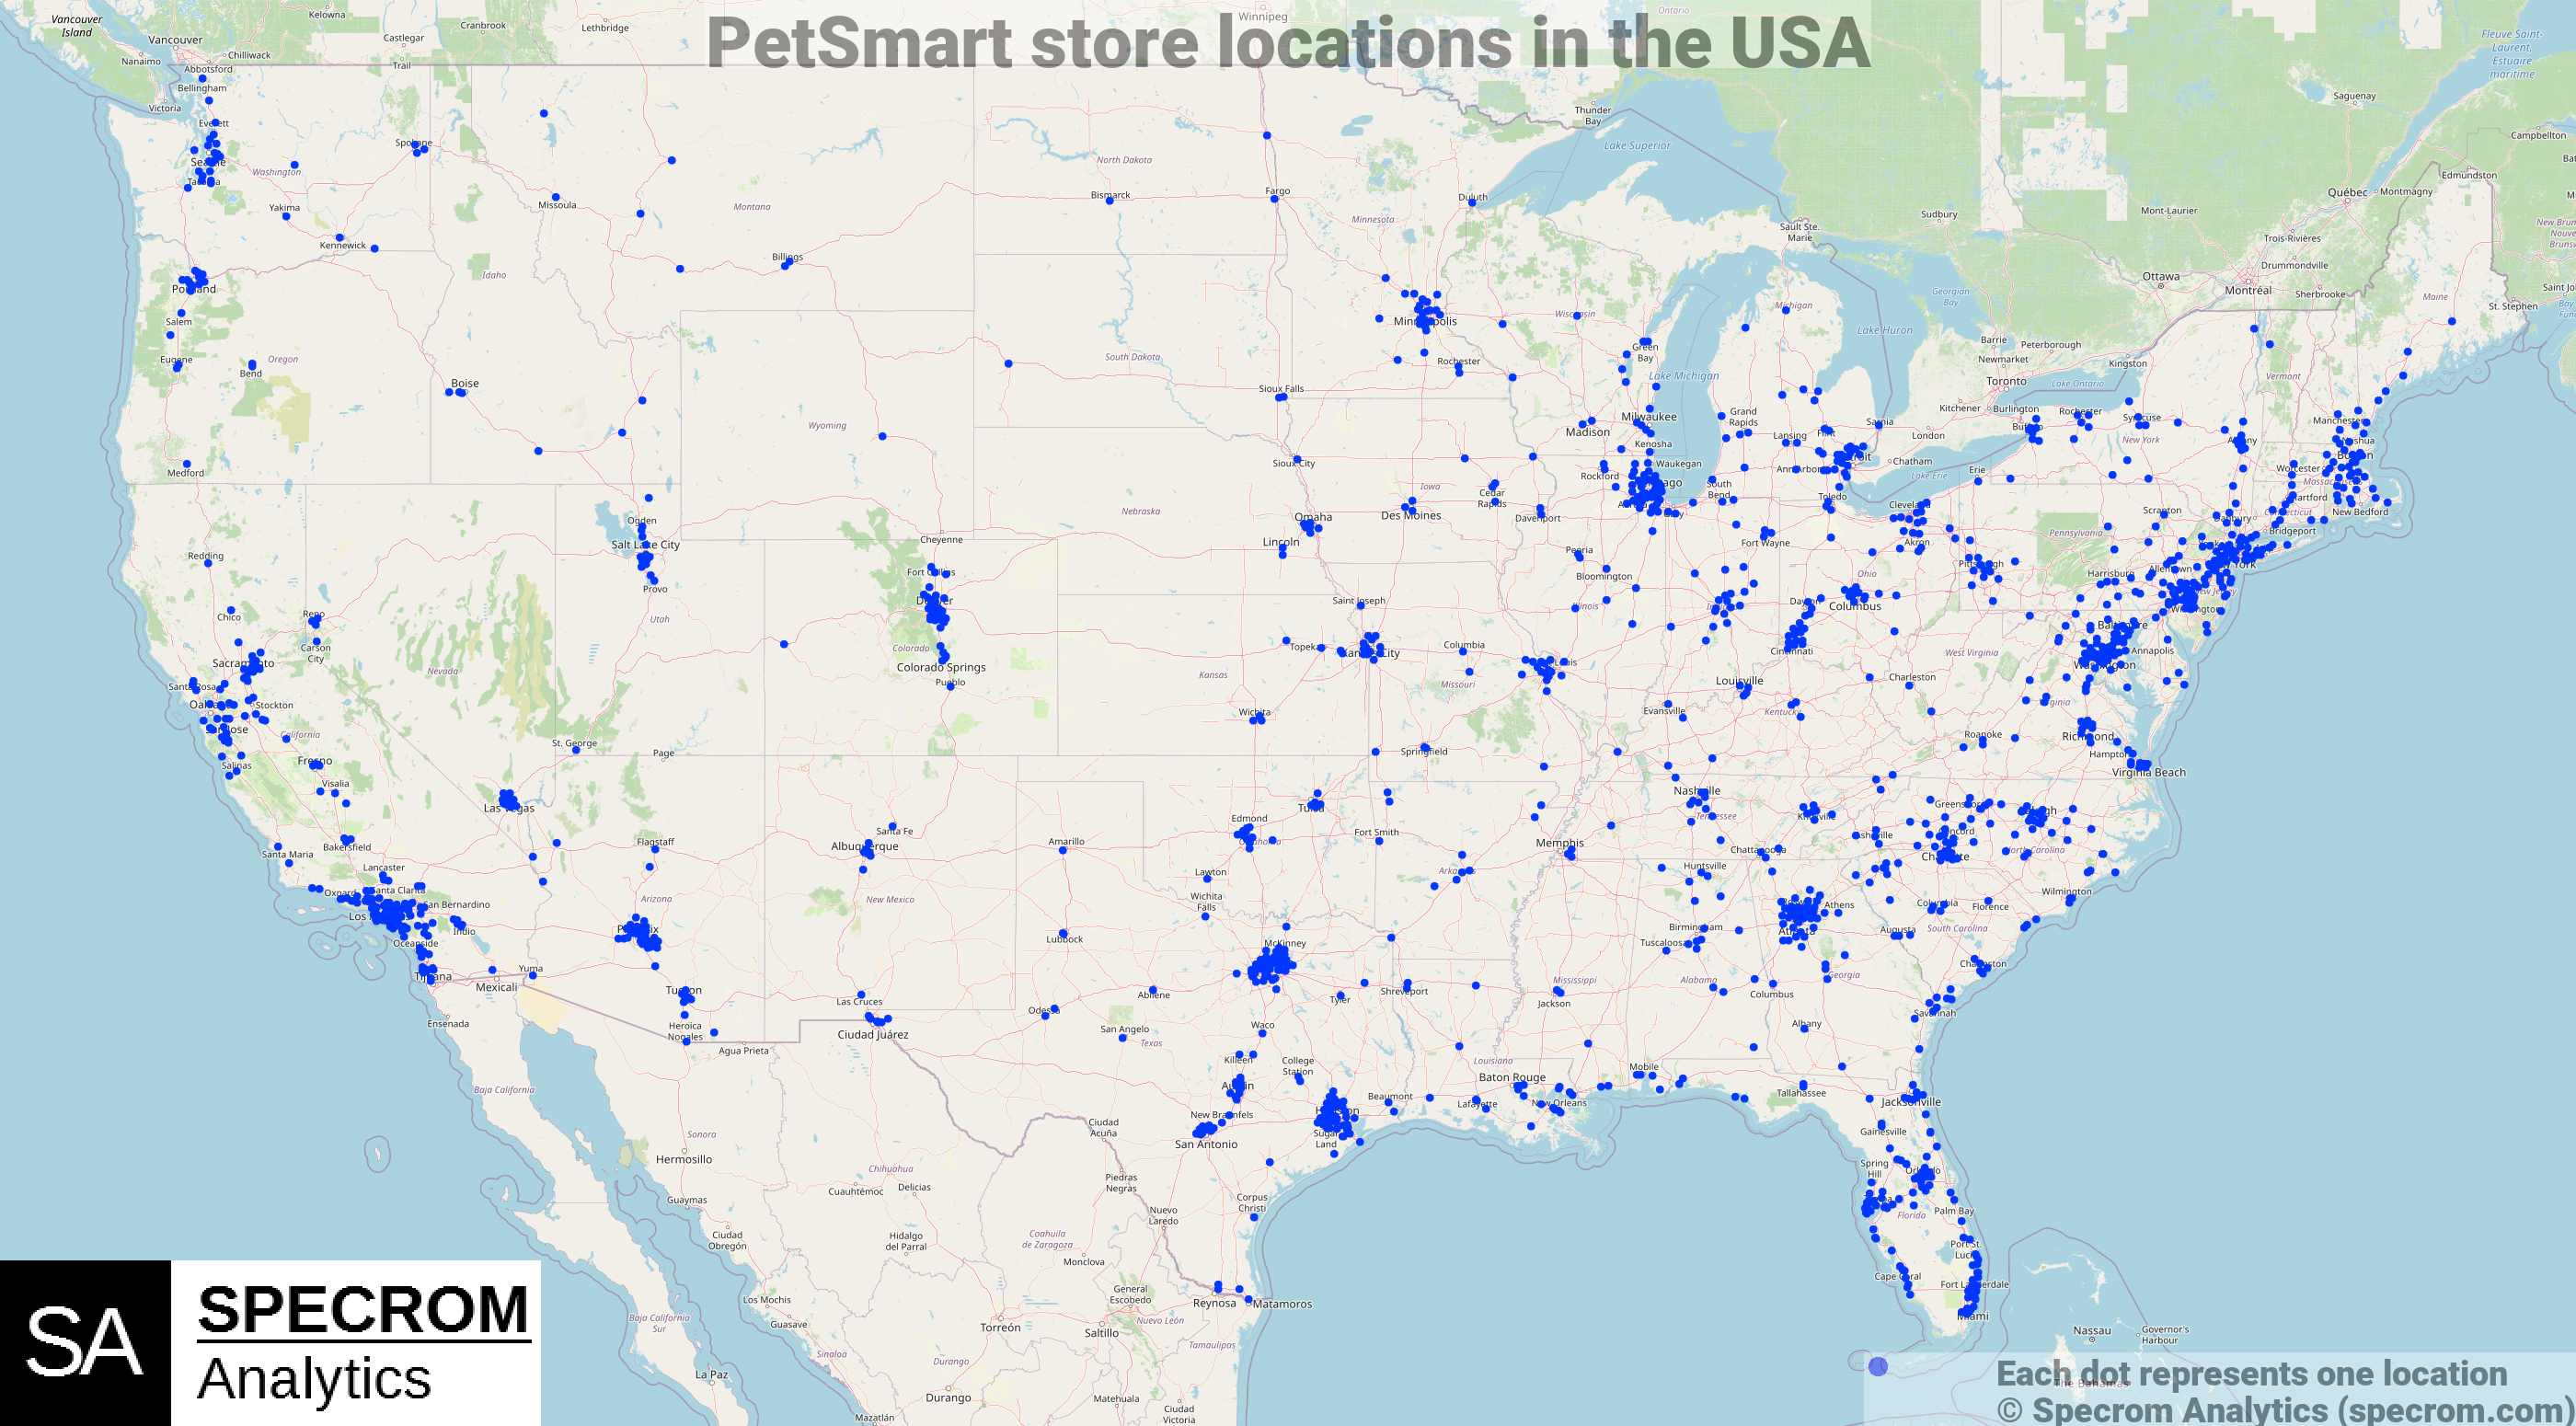 PetSmart store locations in the USA